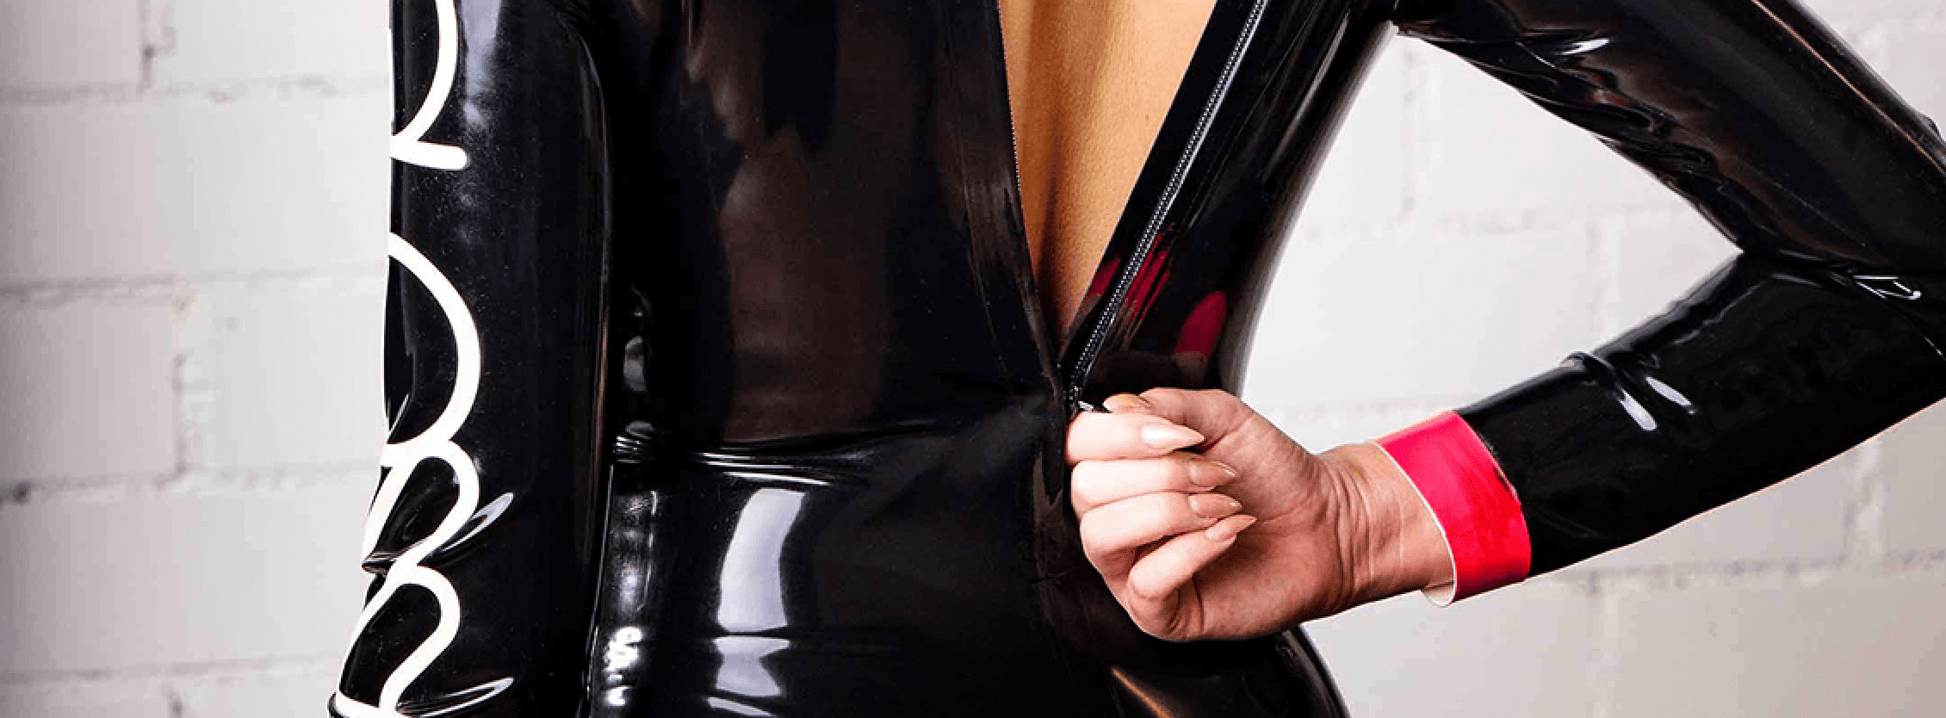 beGLOSS Easy Glide helps you zip into latex catsuits.